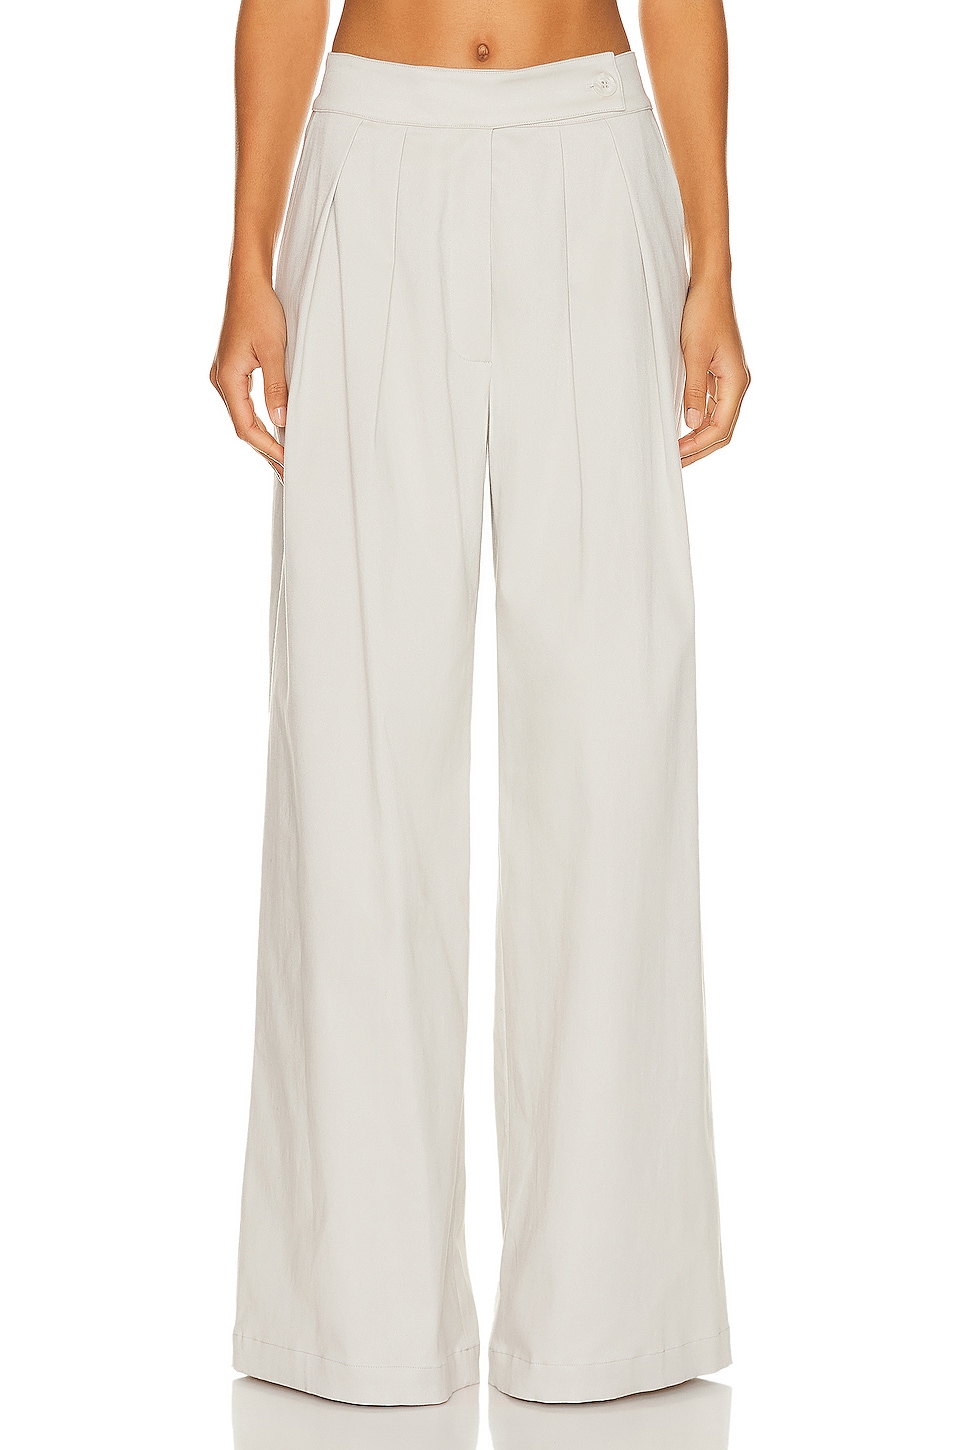 Image 1 of SABLYN Brooklyn Pant in Blizzard